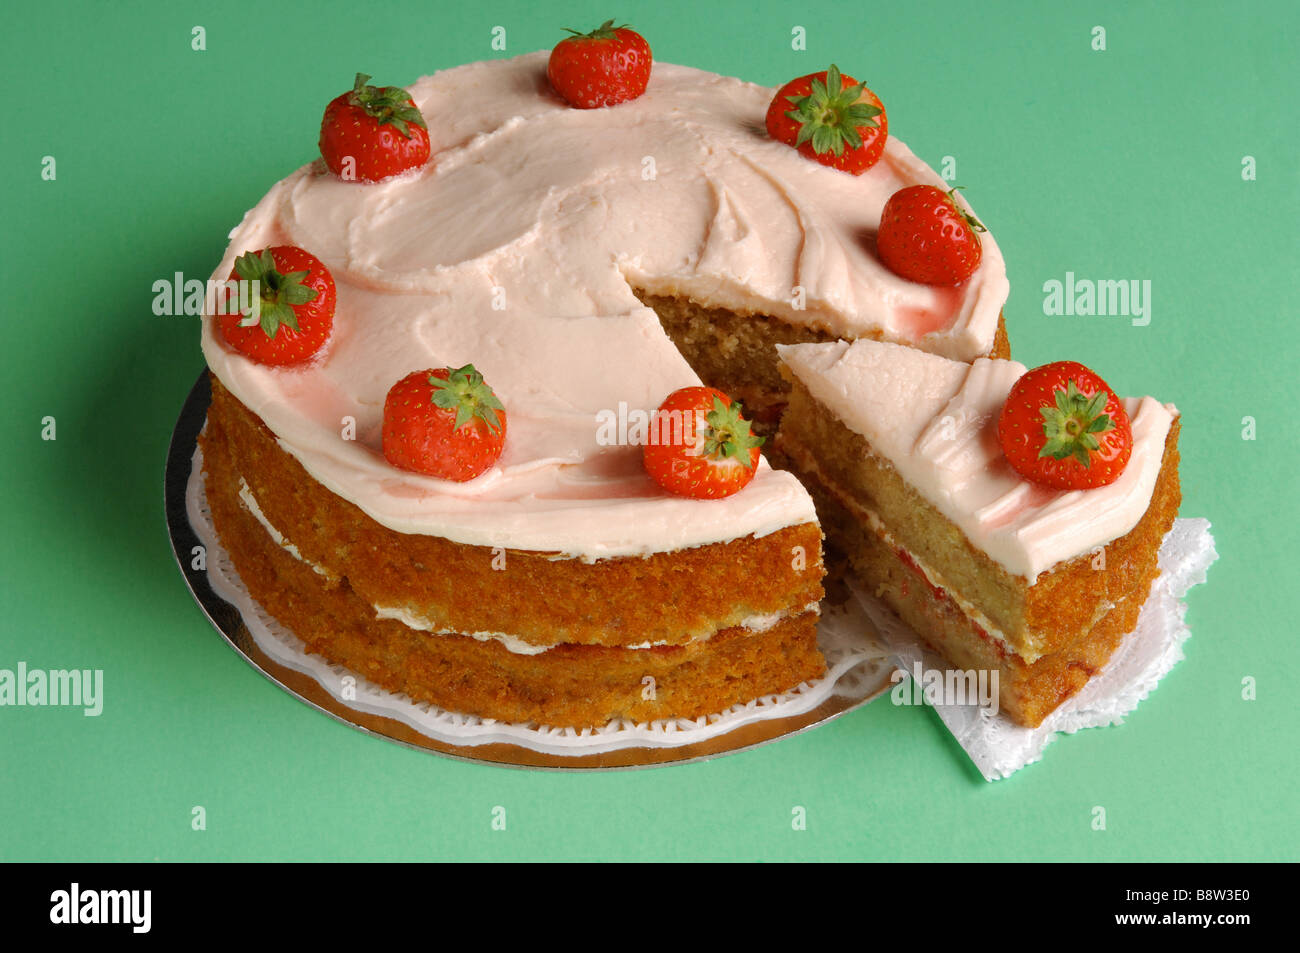 Strawberry sponge cake with slice cut out Stock Photo